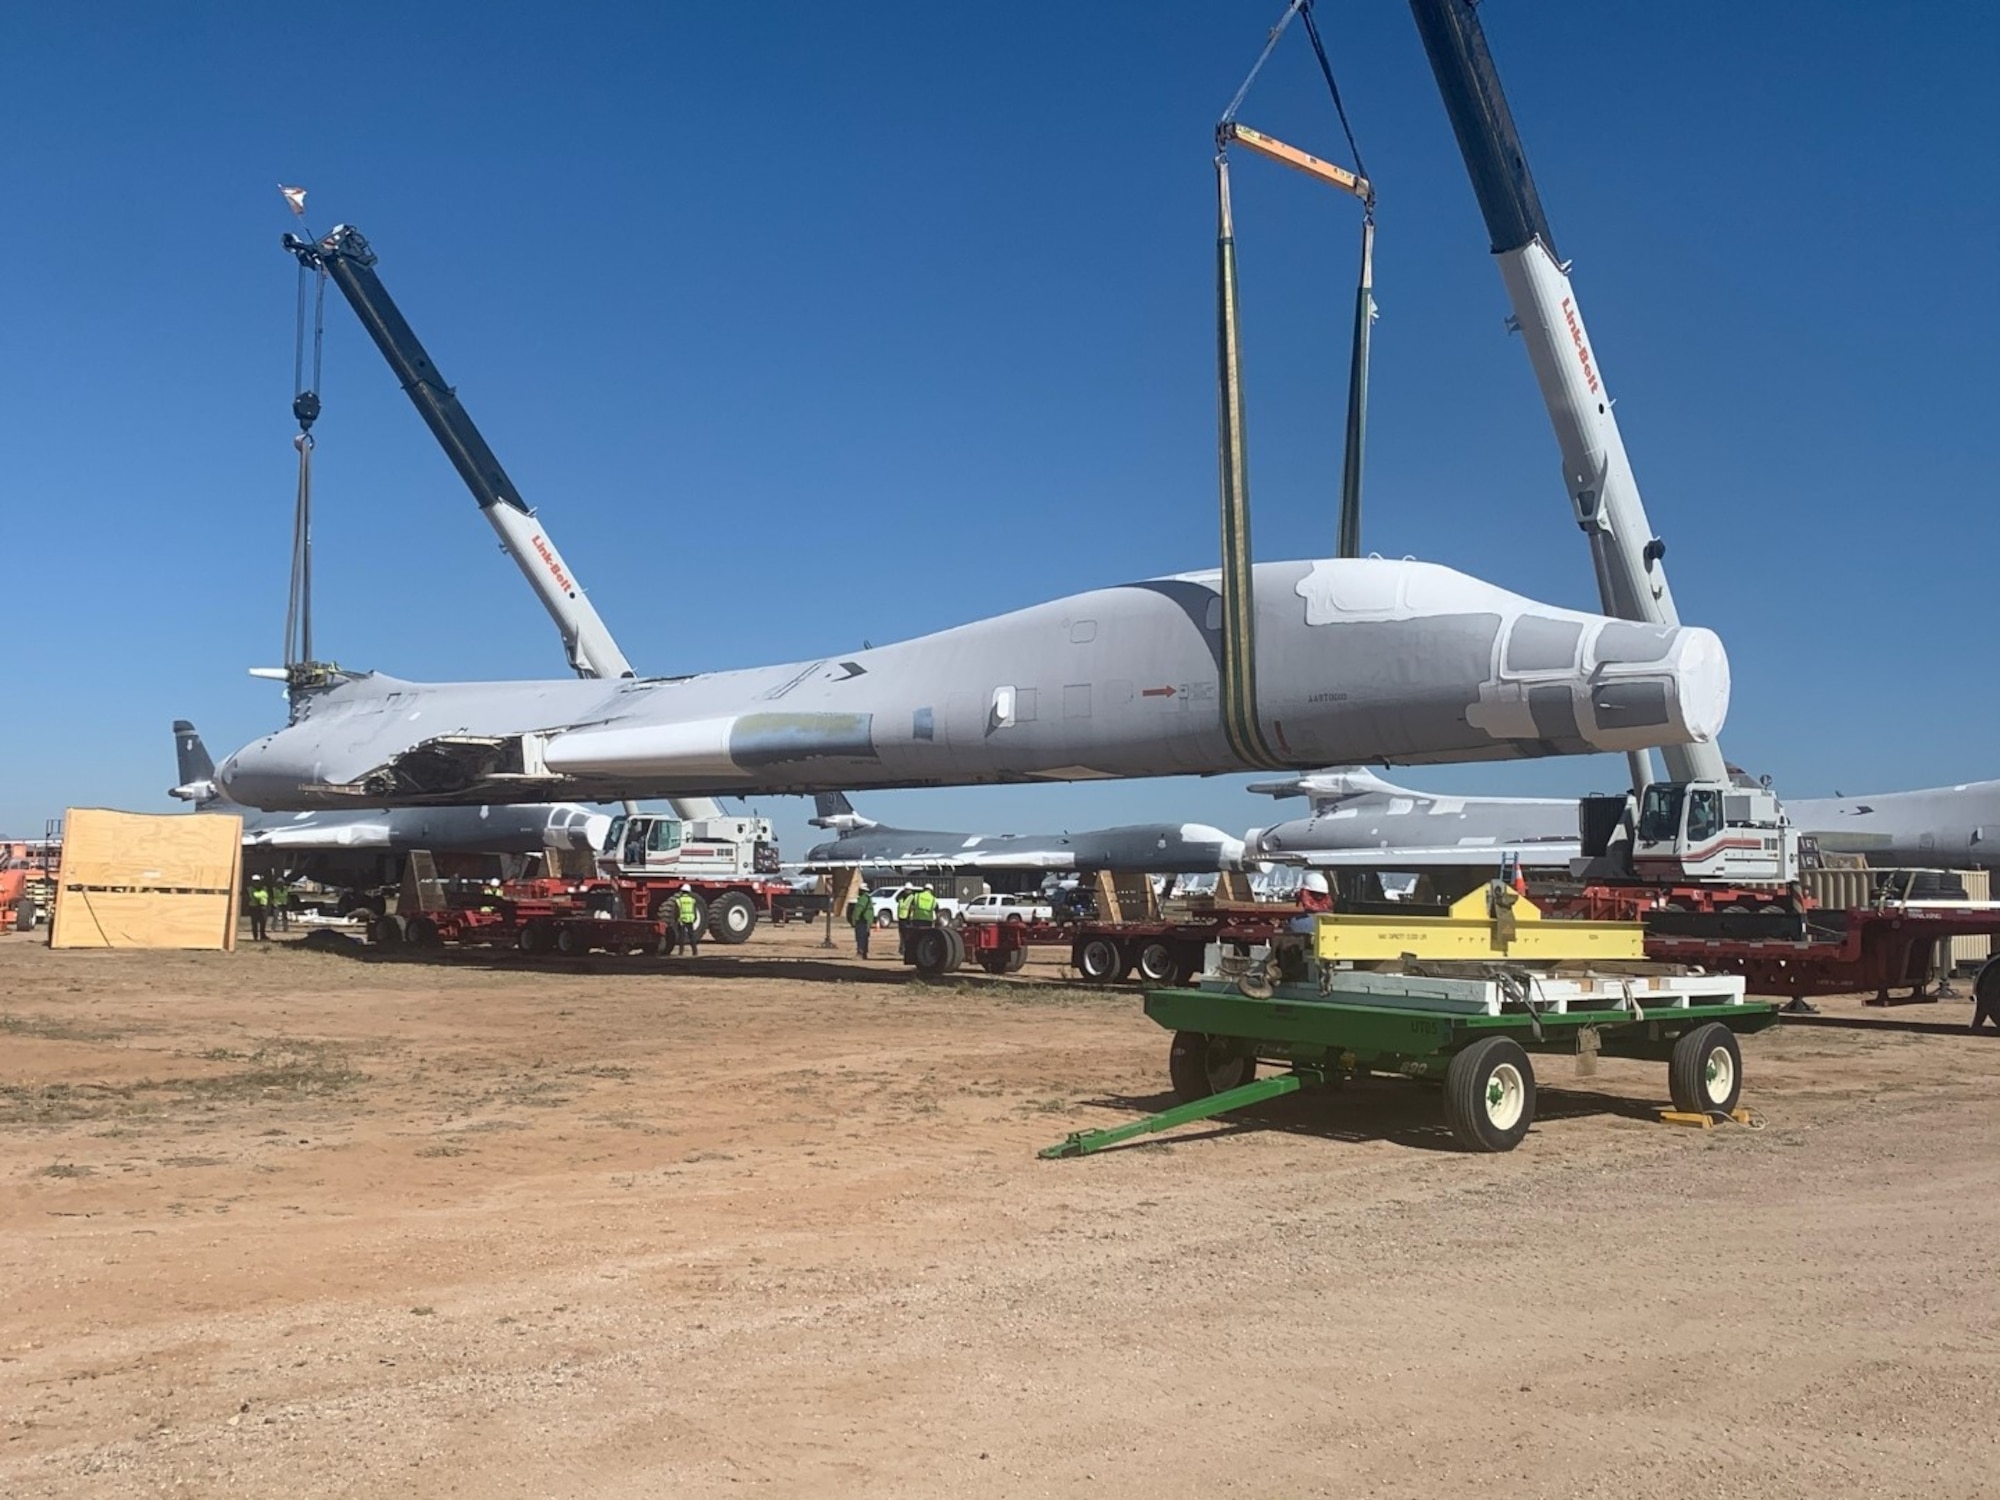 B-1B tail #85-0092 is lifted and placed on flatbed trailers for the 1,000 mile journey to Wichita, Kansas.  The National Institute for Aviation Research at Wichita State University will scan every part of the aircraft to create a digital twin that can be used for research.  (US Air Force Photo)